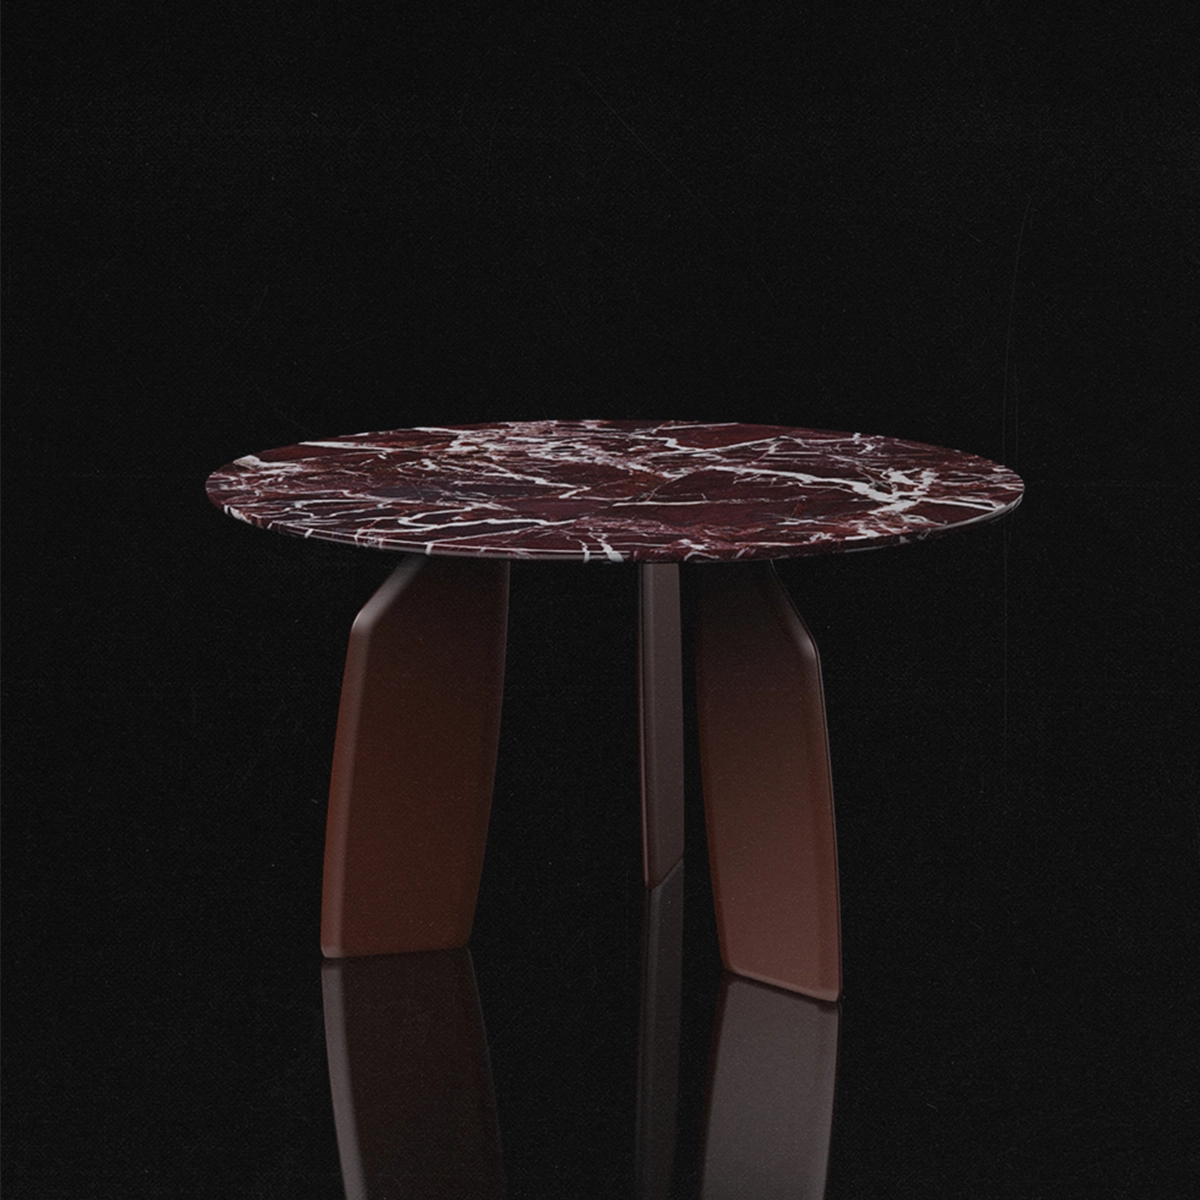 Bavaresk Round marble top table by Christophe de la Fontaine for Dante - Goods and Bads